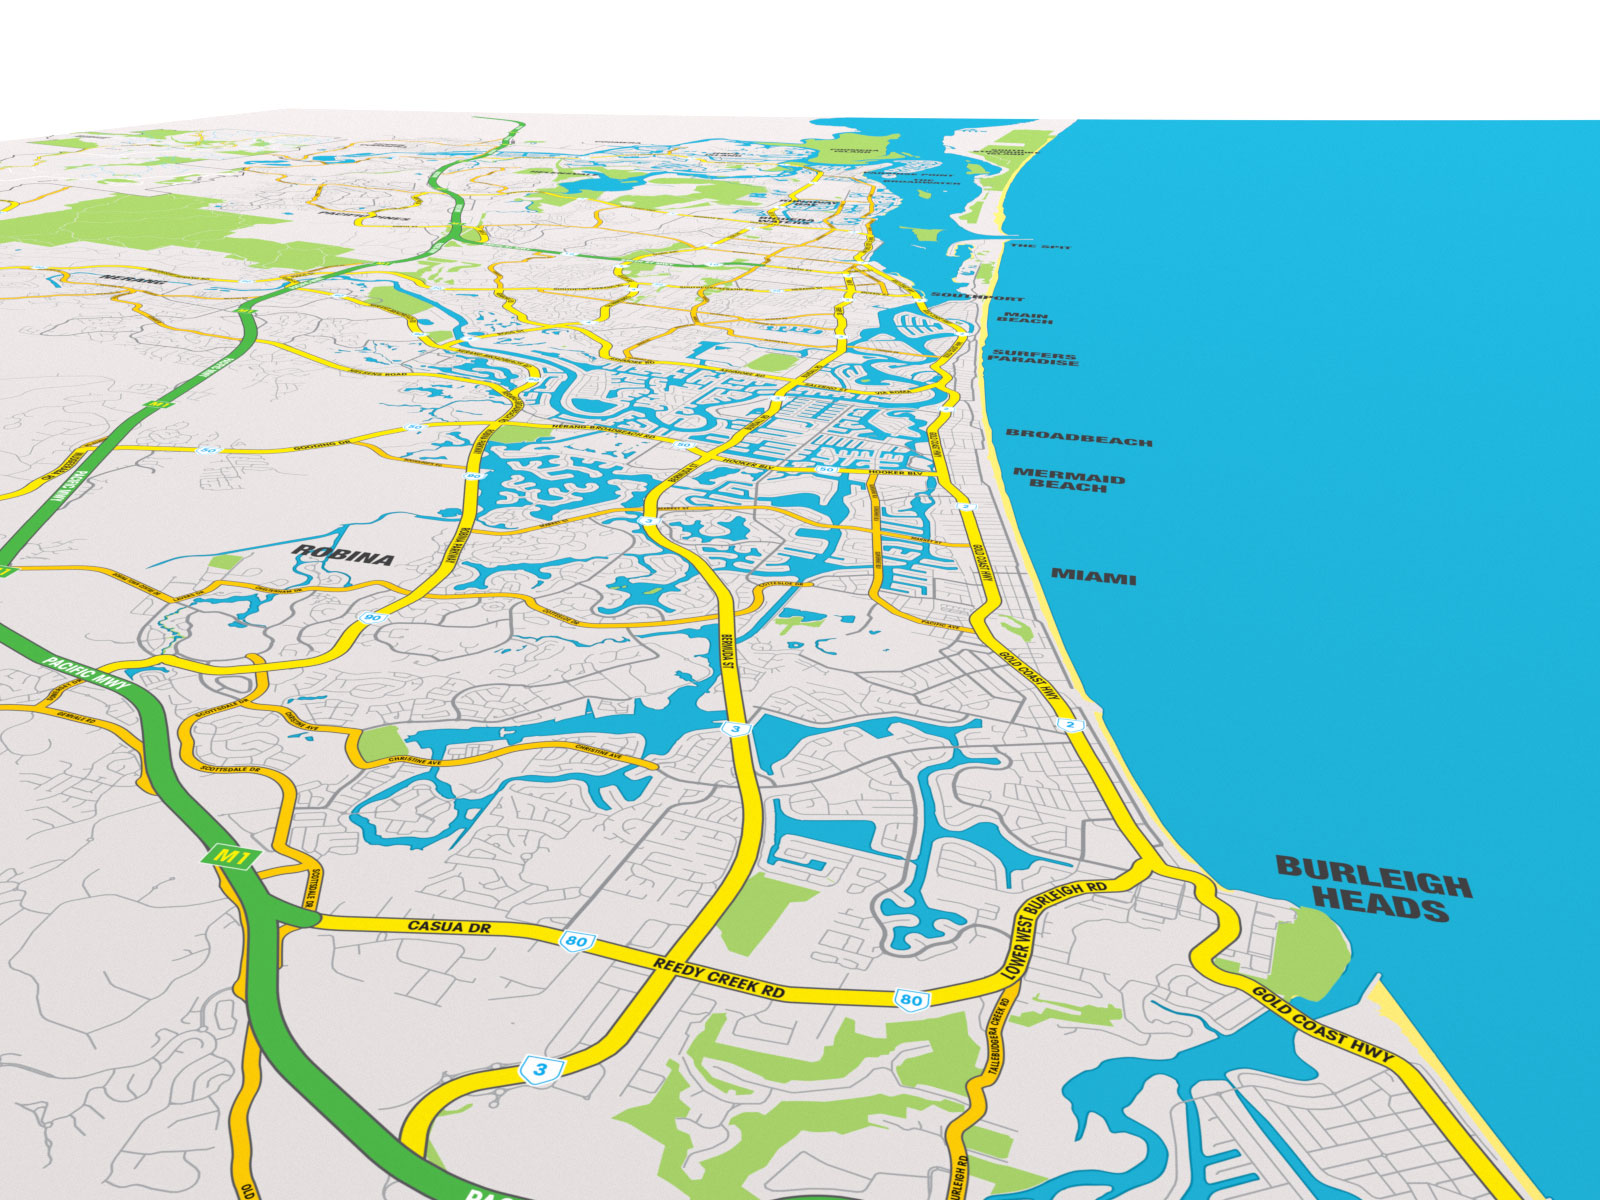 Burleigh Heads map of the gold coast birds eye view perspective